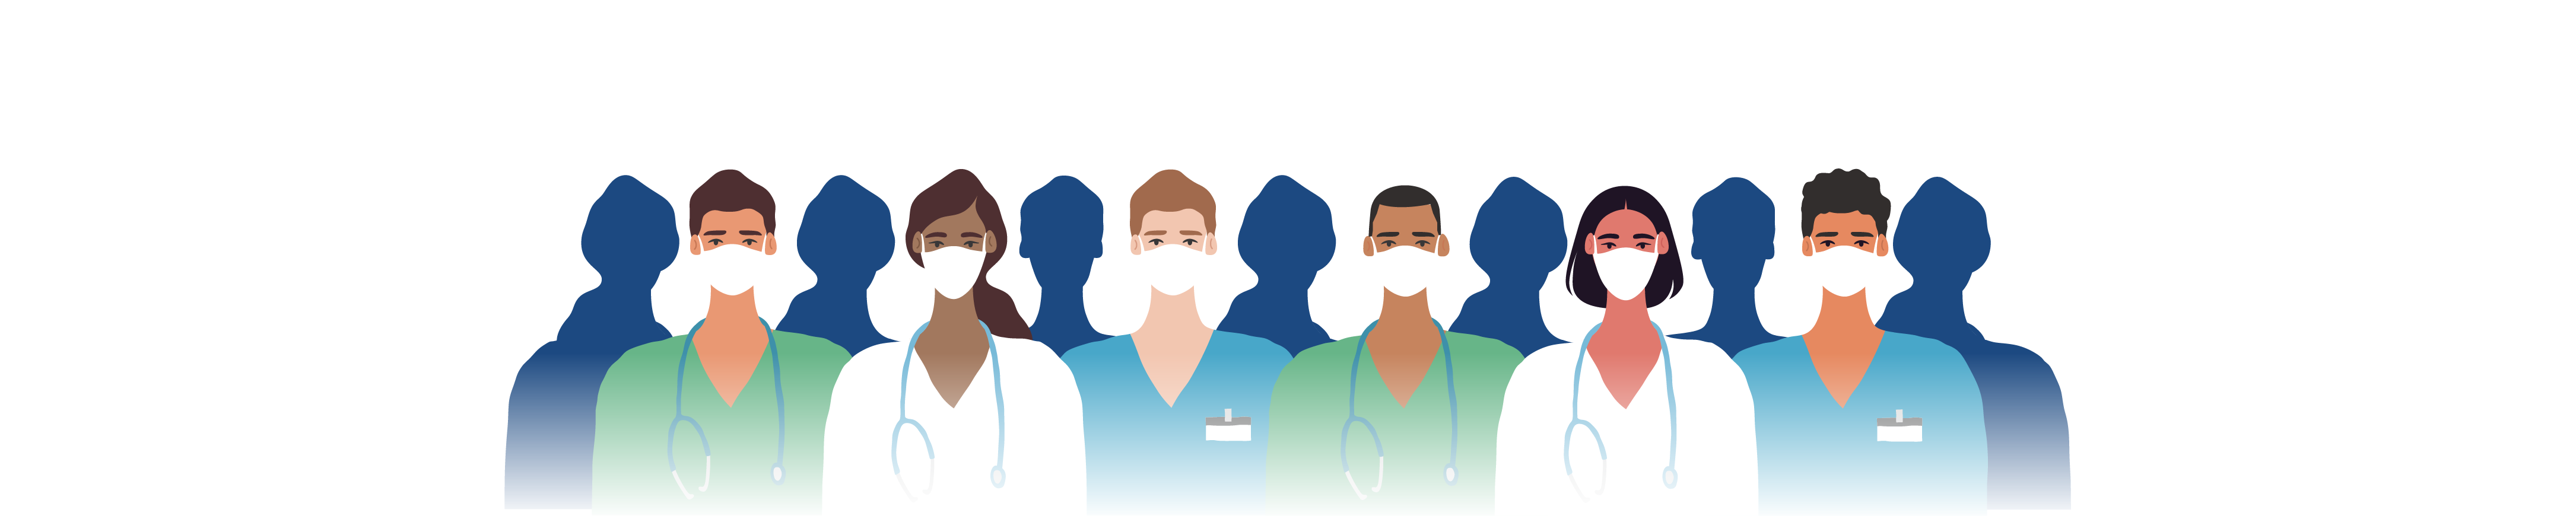 illustration of healthcare workers